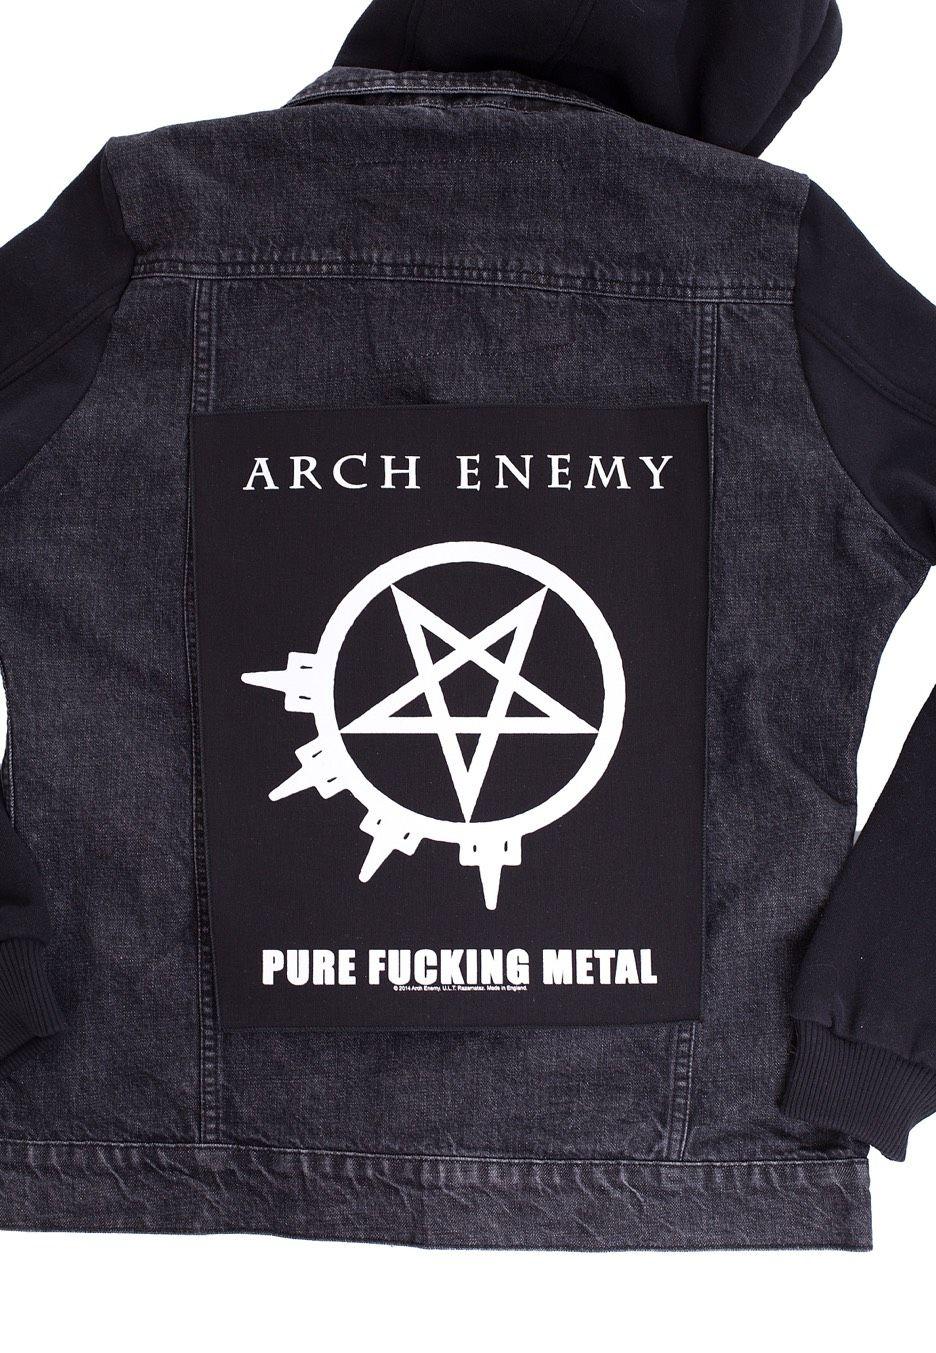 Arch Enemy Logo - Arch Enemy - Pure Fucking Metal - Backpatch - Official Metal ...